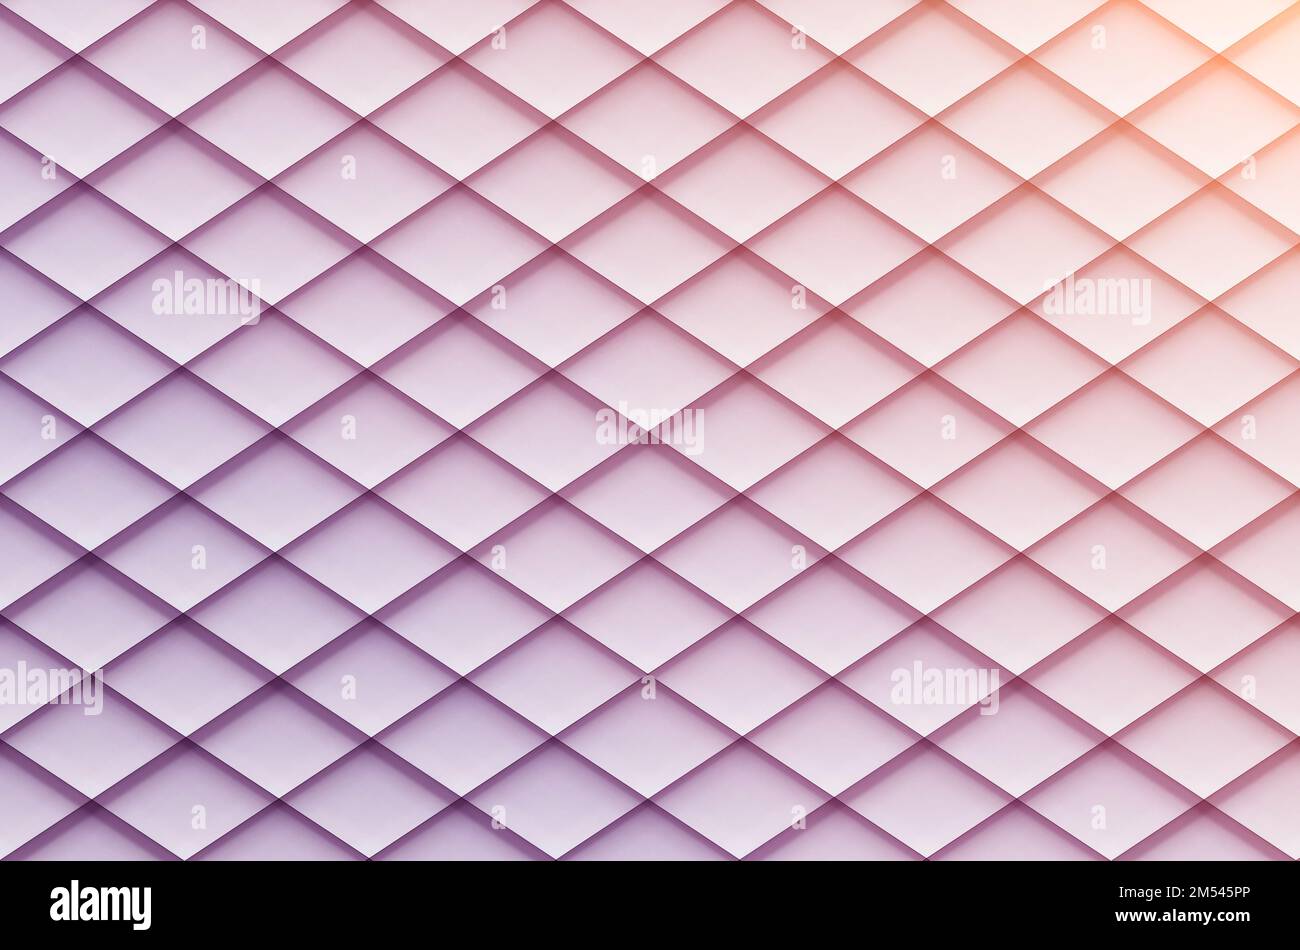 Gradient rhombus shaped texture in light pink and magenta colors as an abstract background. Stock Photo